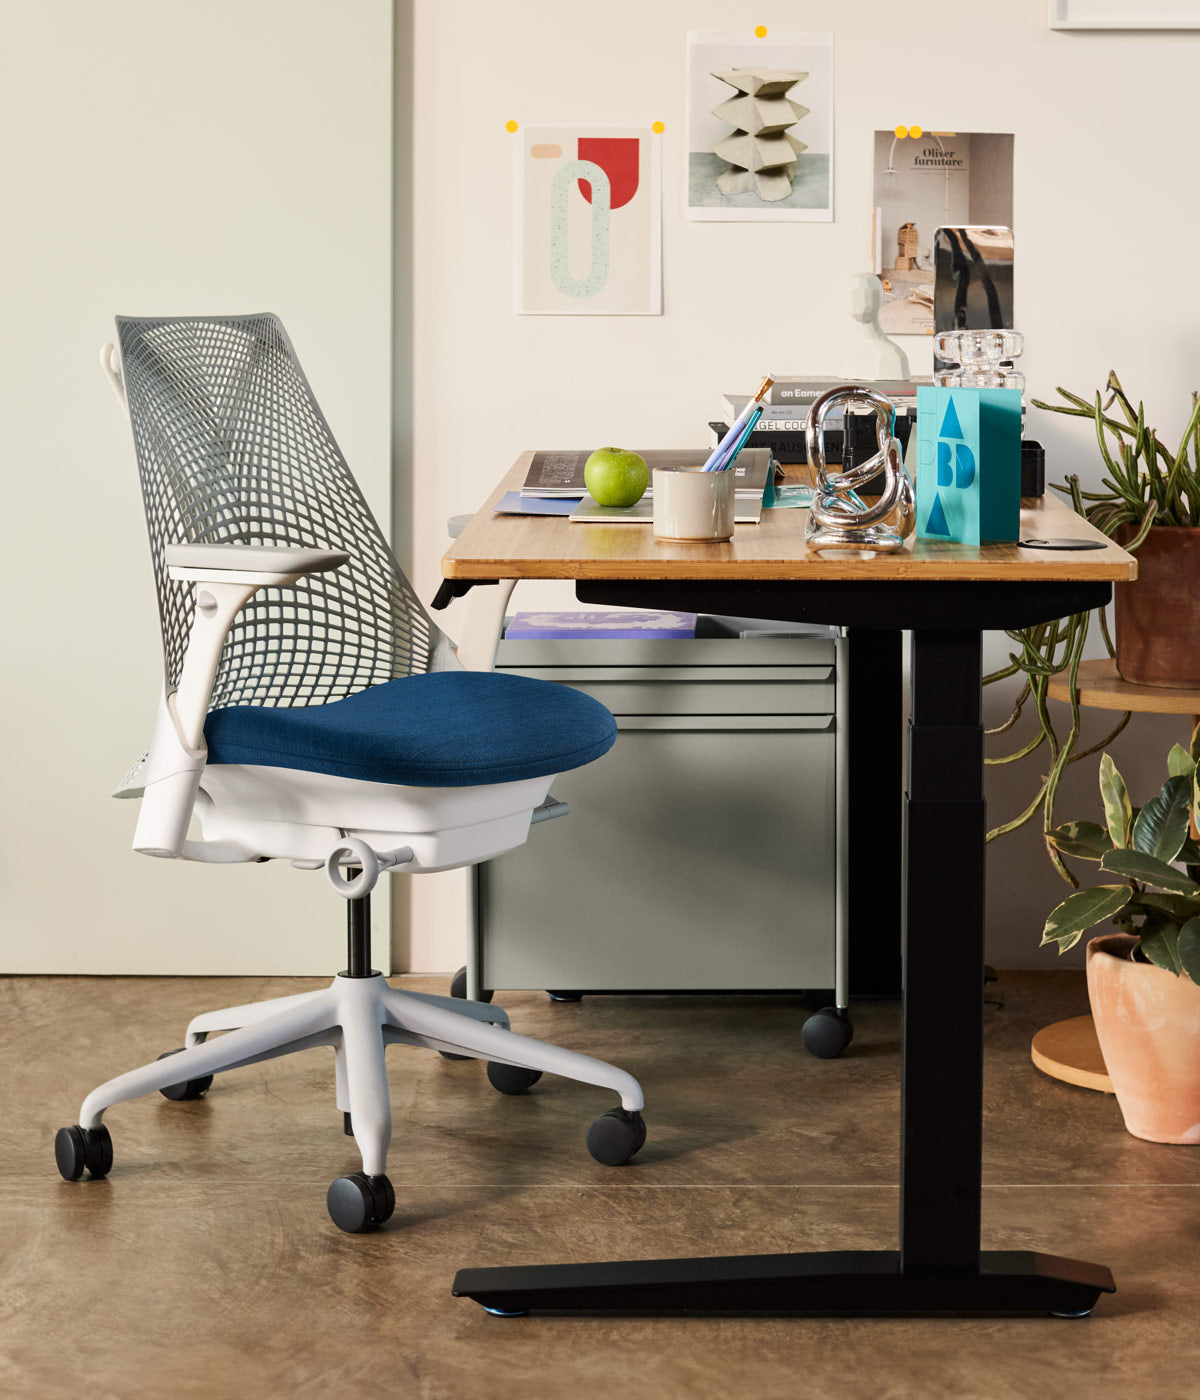 A herman Miller Sayl with a blue cushion alongside a Fully Jarvis Sit to Stand Desk with a bamboo top